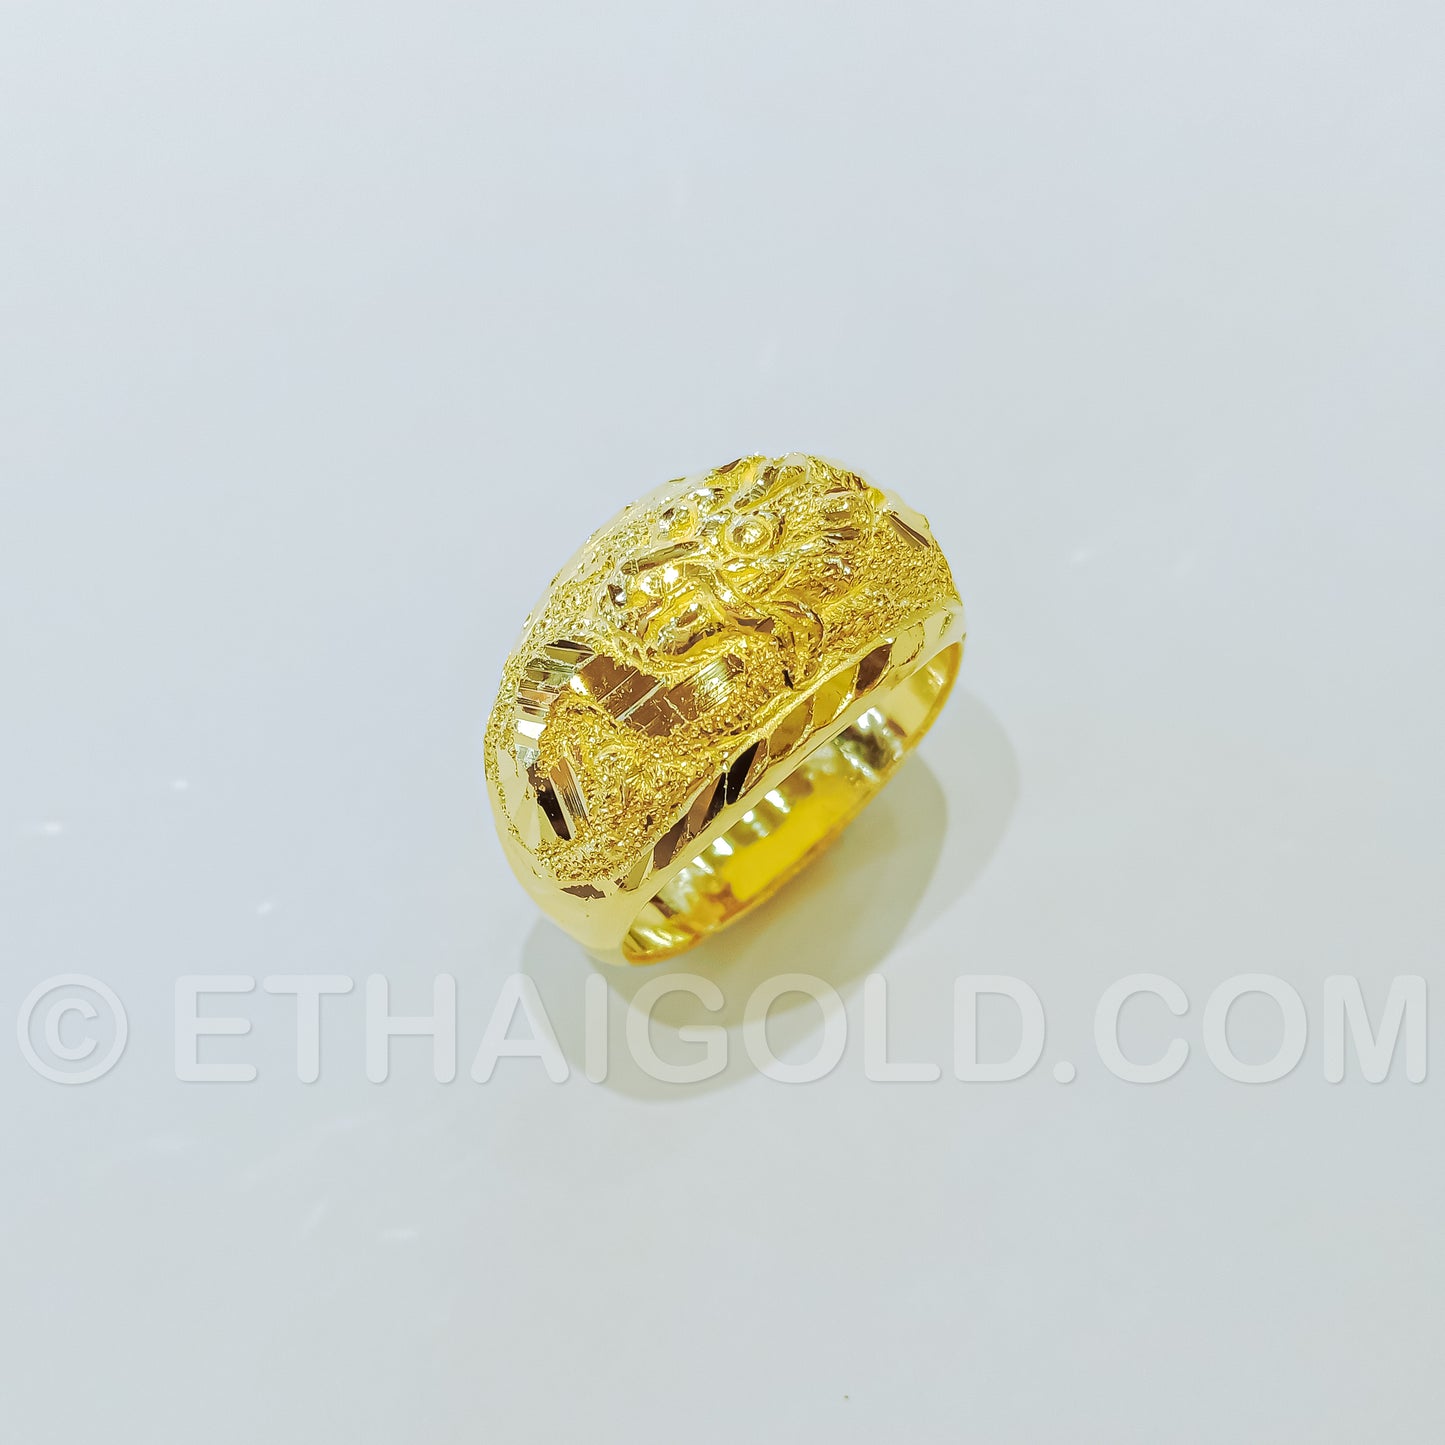 1/8 BAHT POLISHED SPARKLING DIAMOND-CUT HOLLOW DRAGON RING IN 23K GOLD (ID: R130HS)